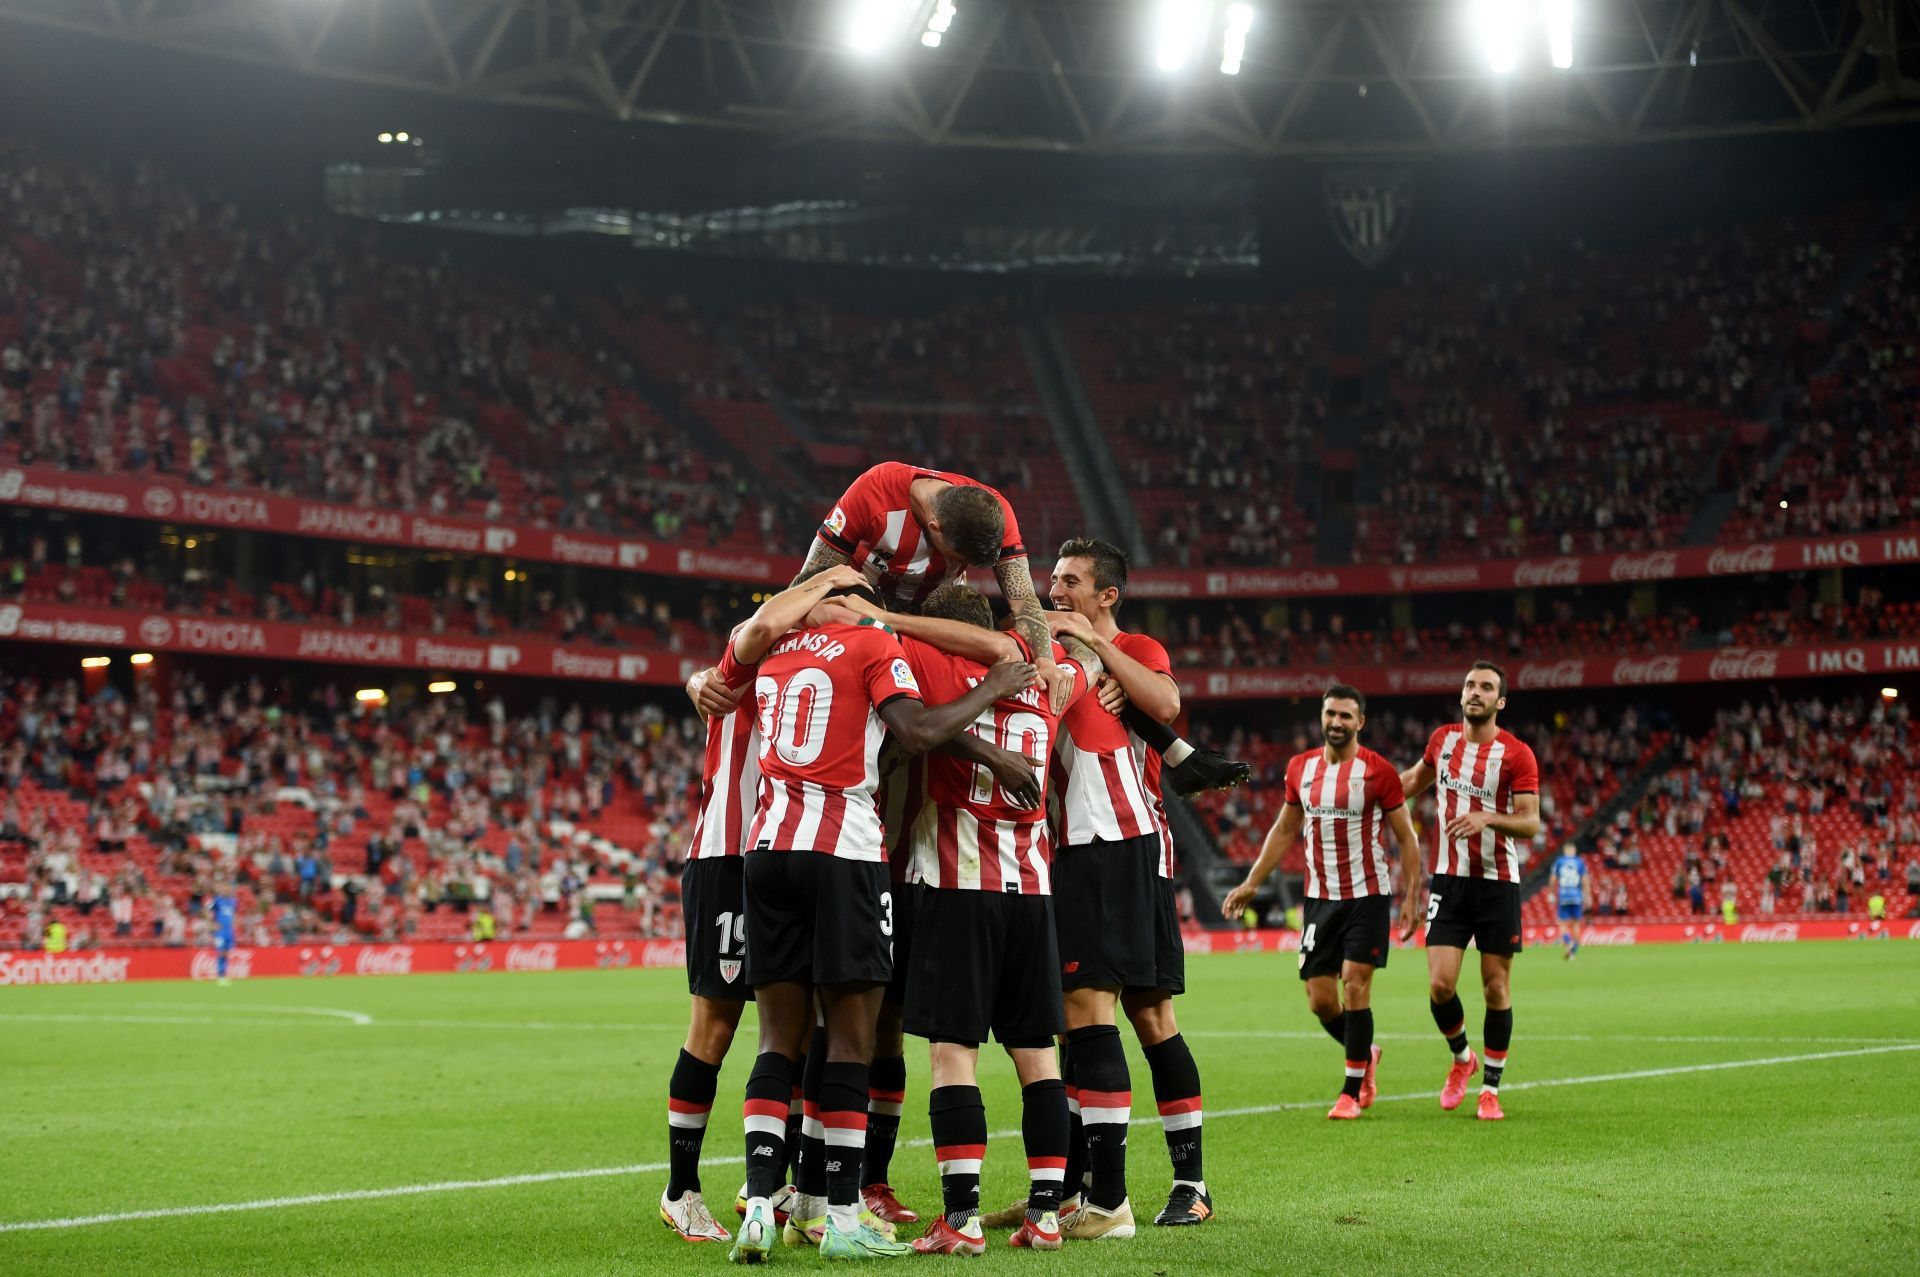 Athletic Bilbao take on Mallorca this weekend